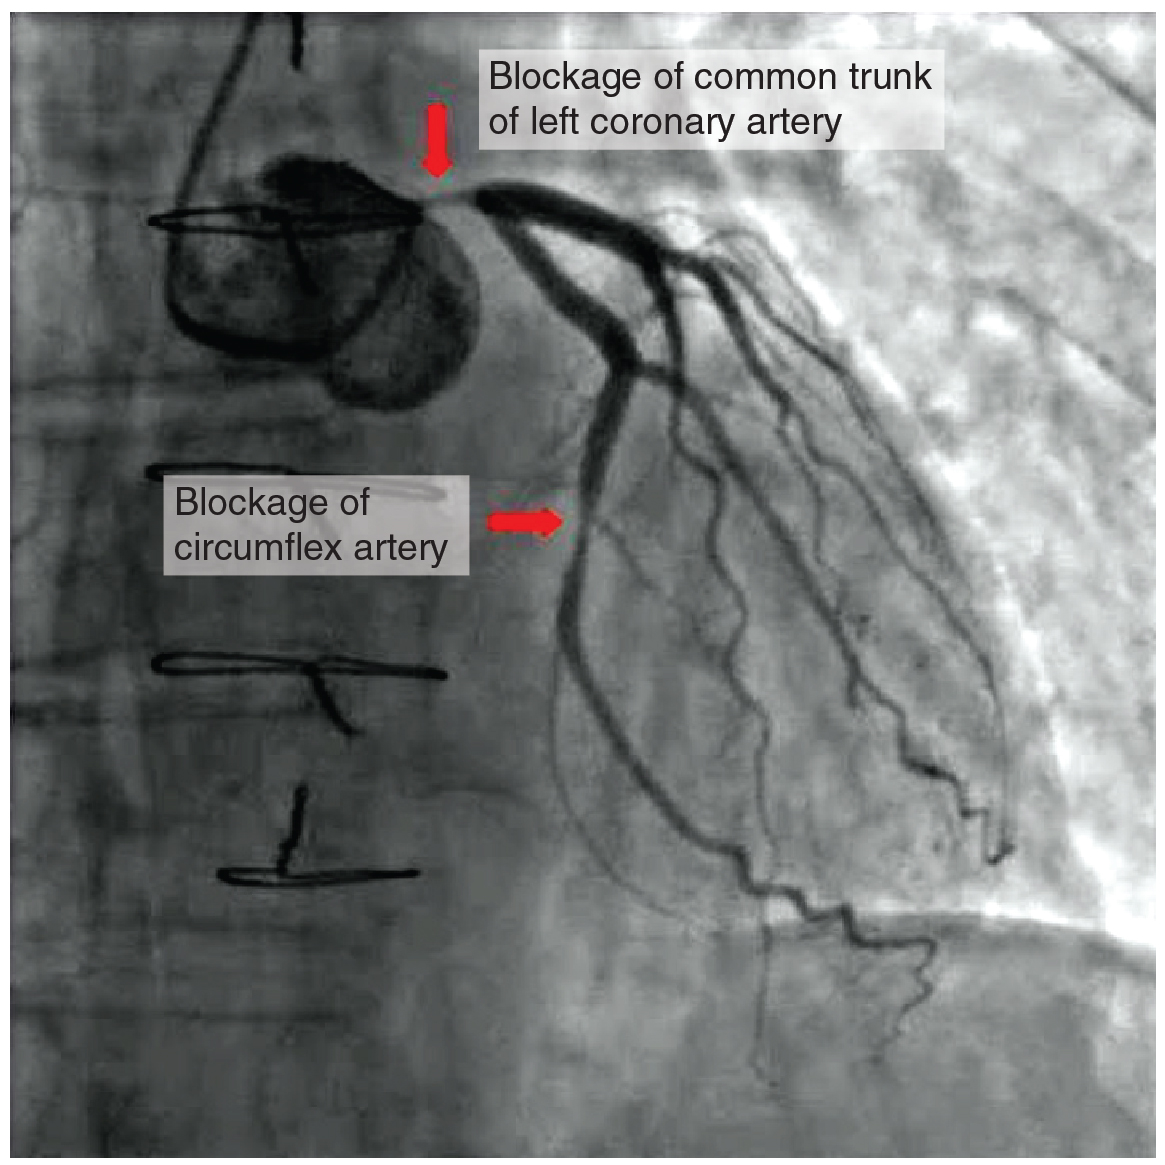 This photo shows a blockage in the coronary artery and in the circumflex artery.